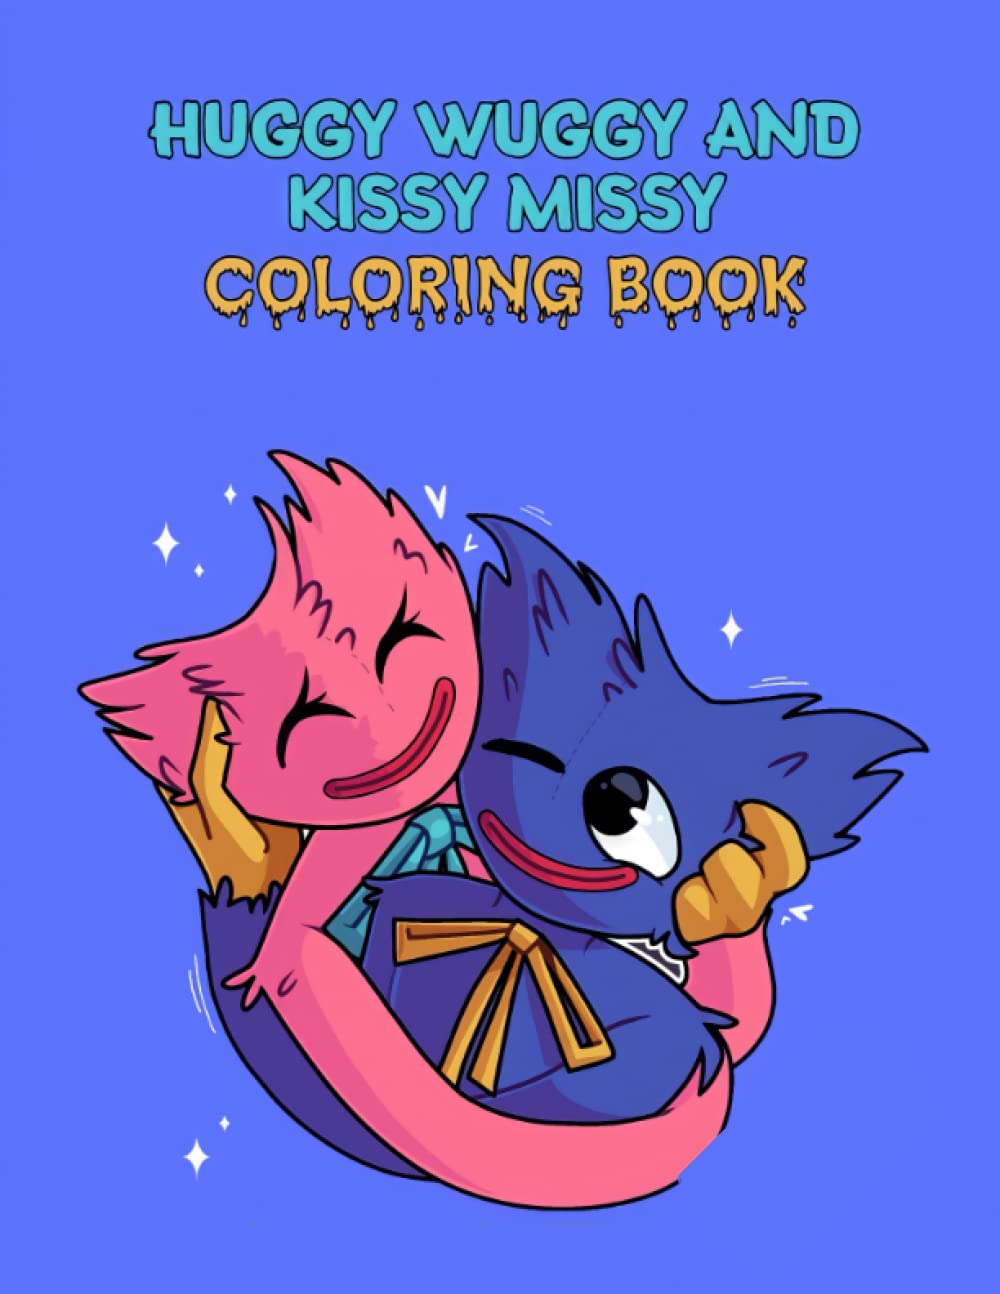 Huggy wuggy And Kissy missy Coloring book: 60 Pages of High Quality coloring Designs For Kids And Adults. Puppy playtime Book. 5 x 11. night funkin